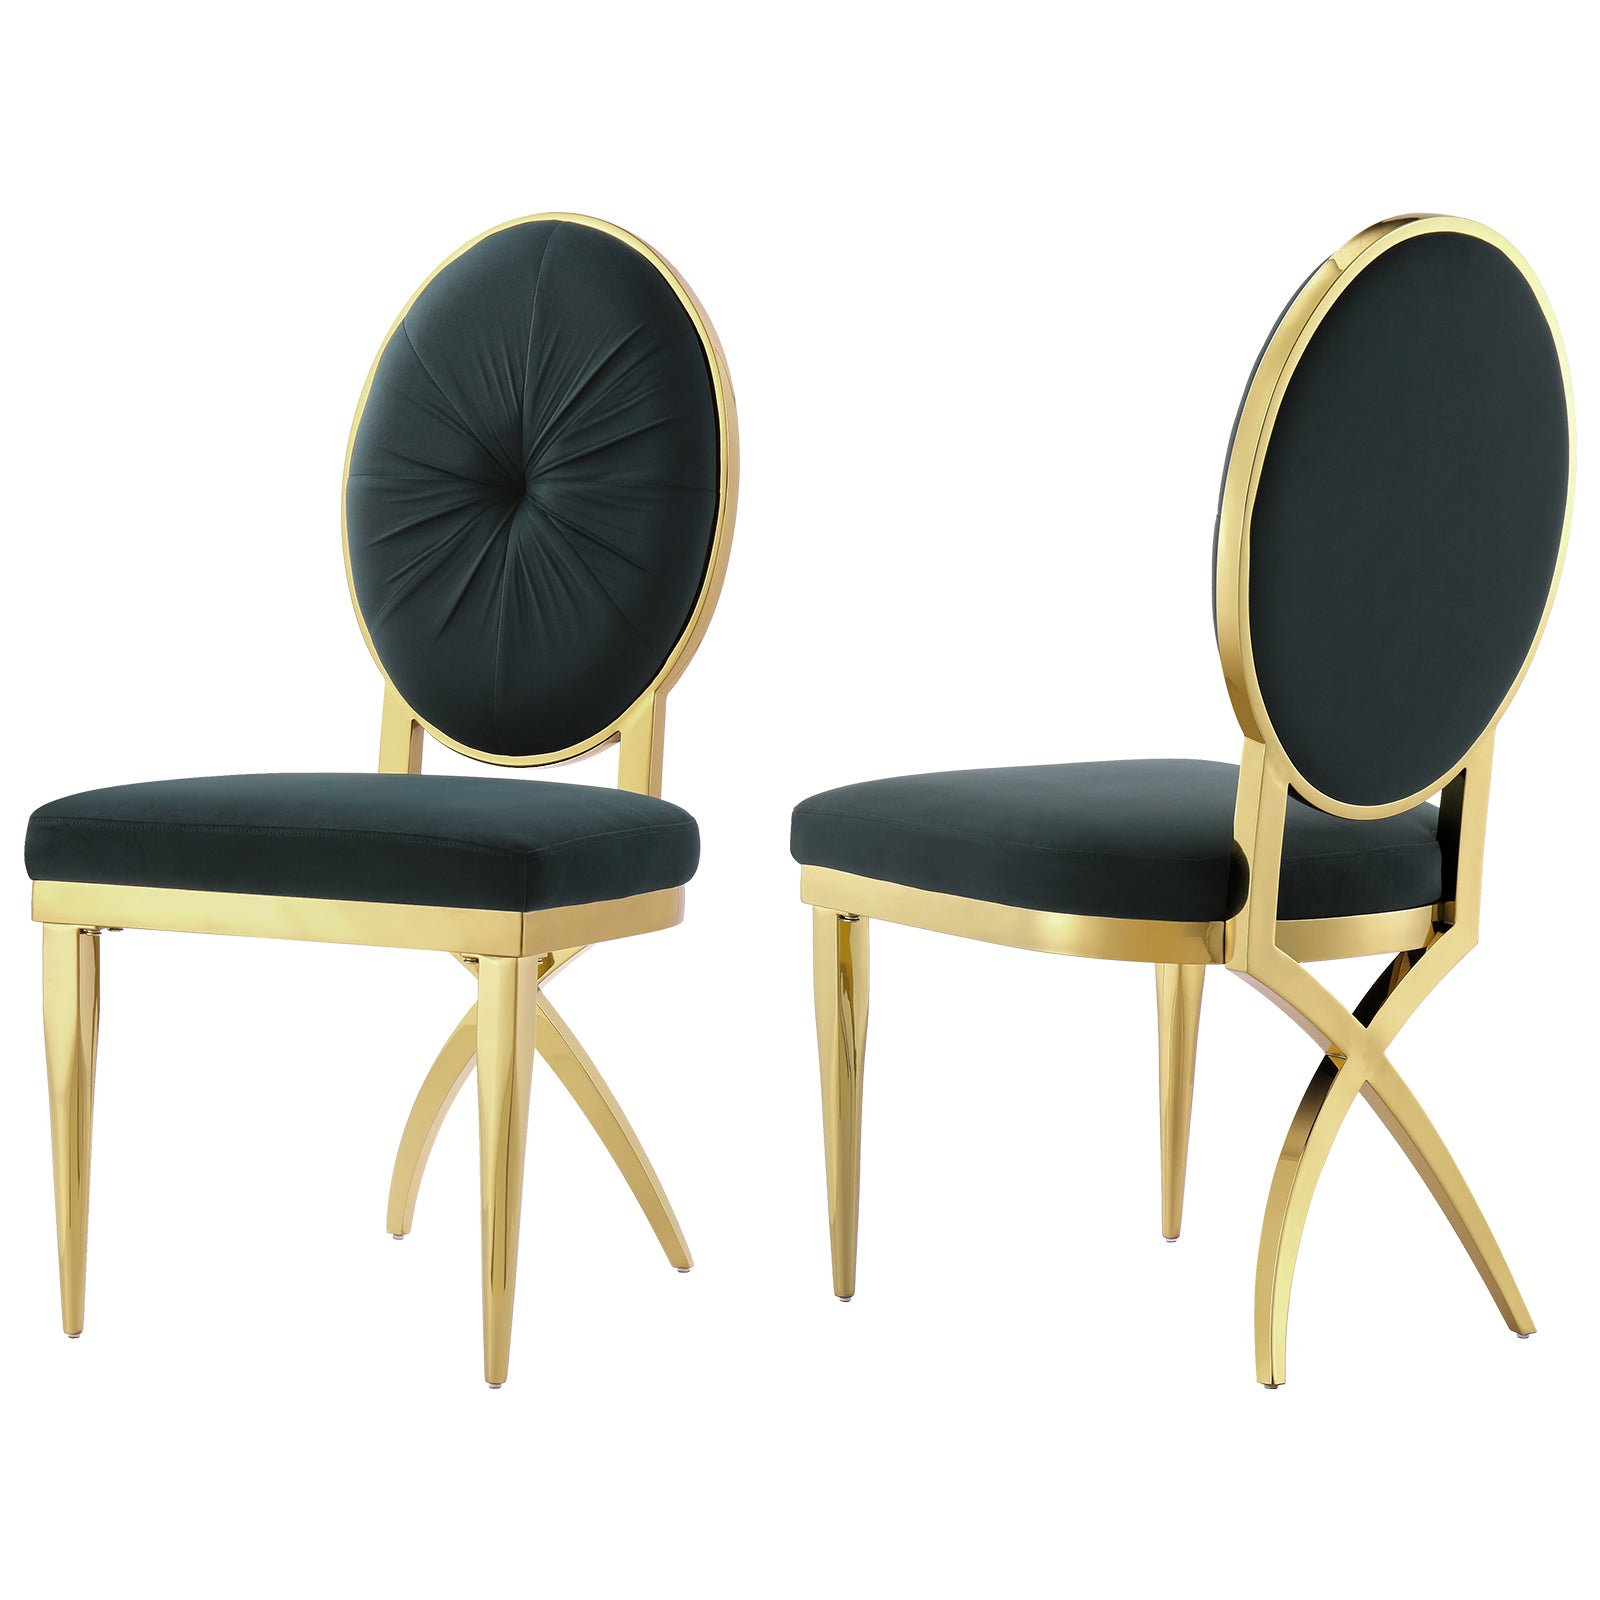 Adding Personality and Luxury to Your Dining Space with Green Velvet Dining Chairs